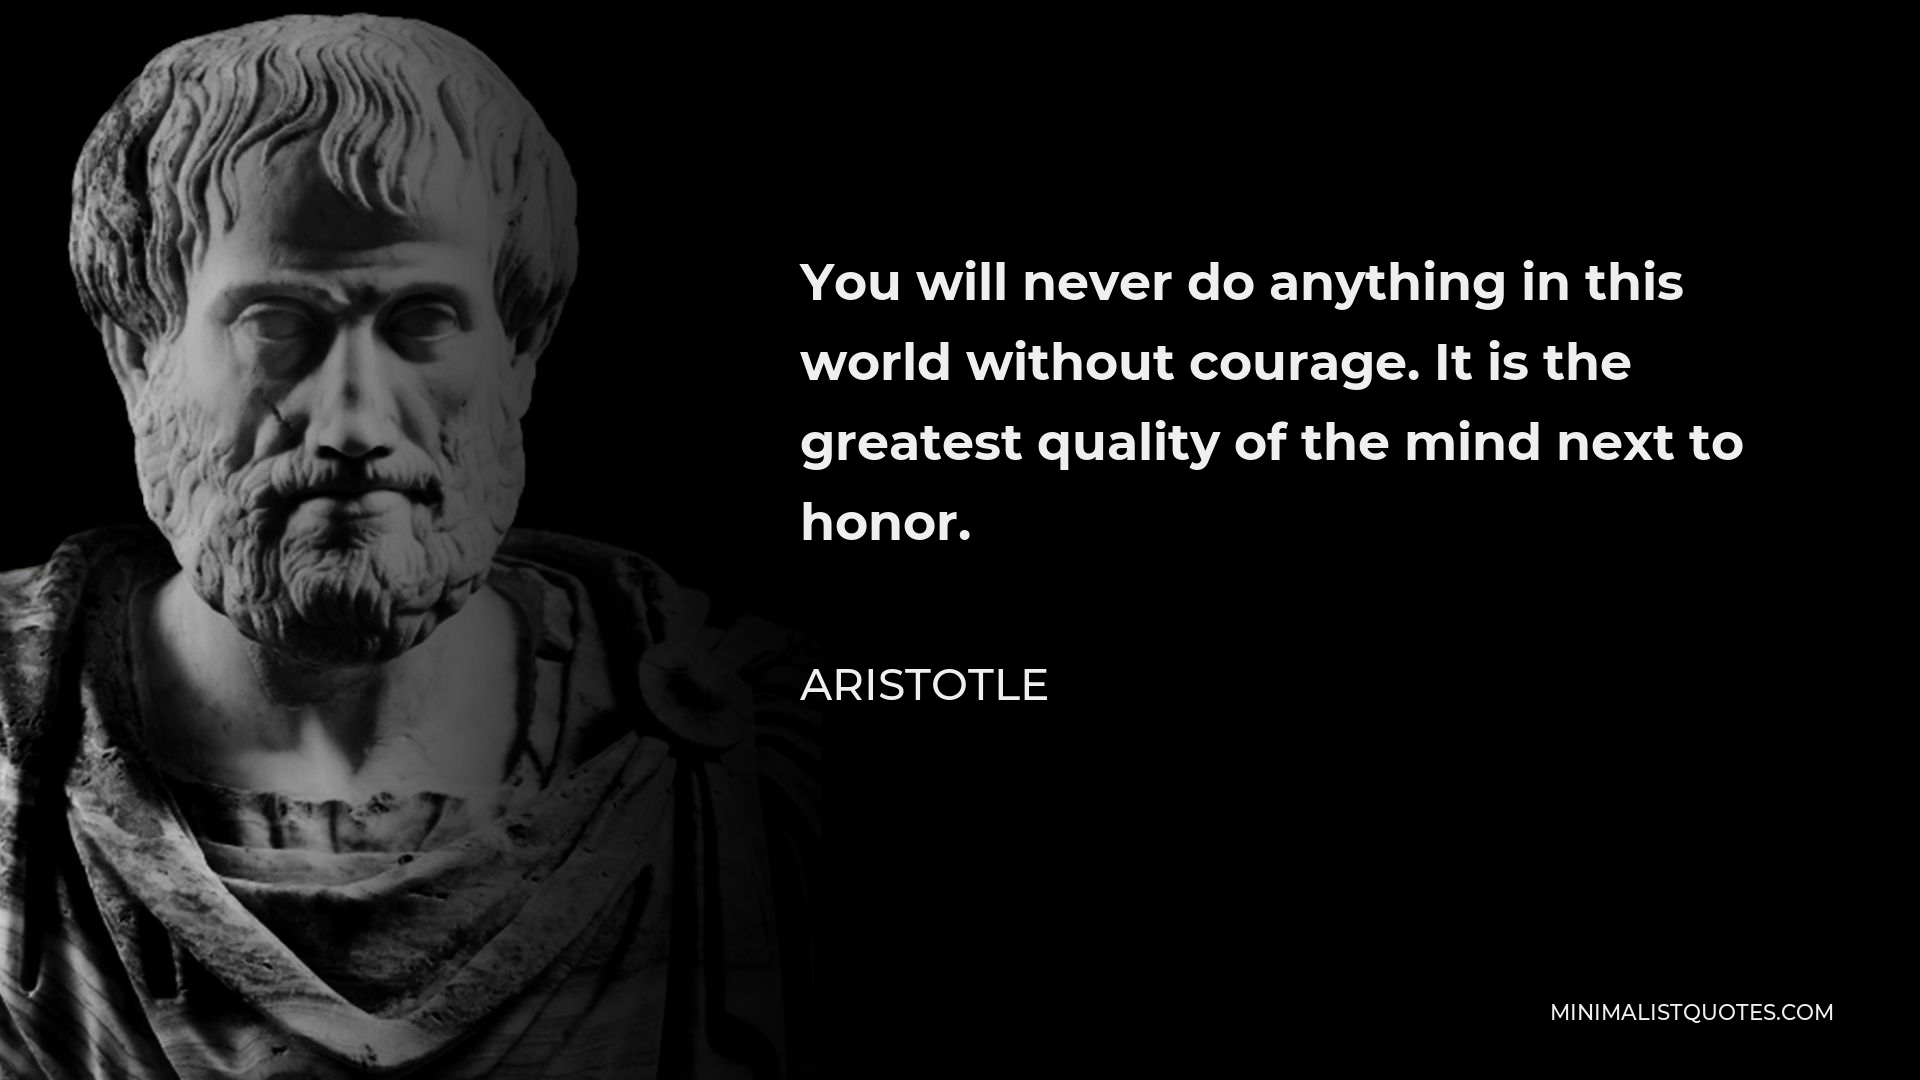 Aristotle Quote - You will never do anything in this world without courage. It is the greatest quality of the mind next to honor.